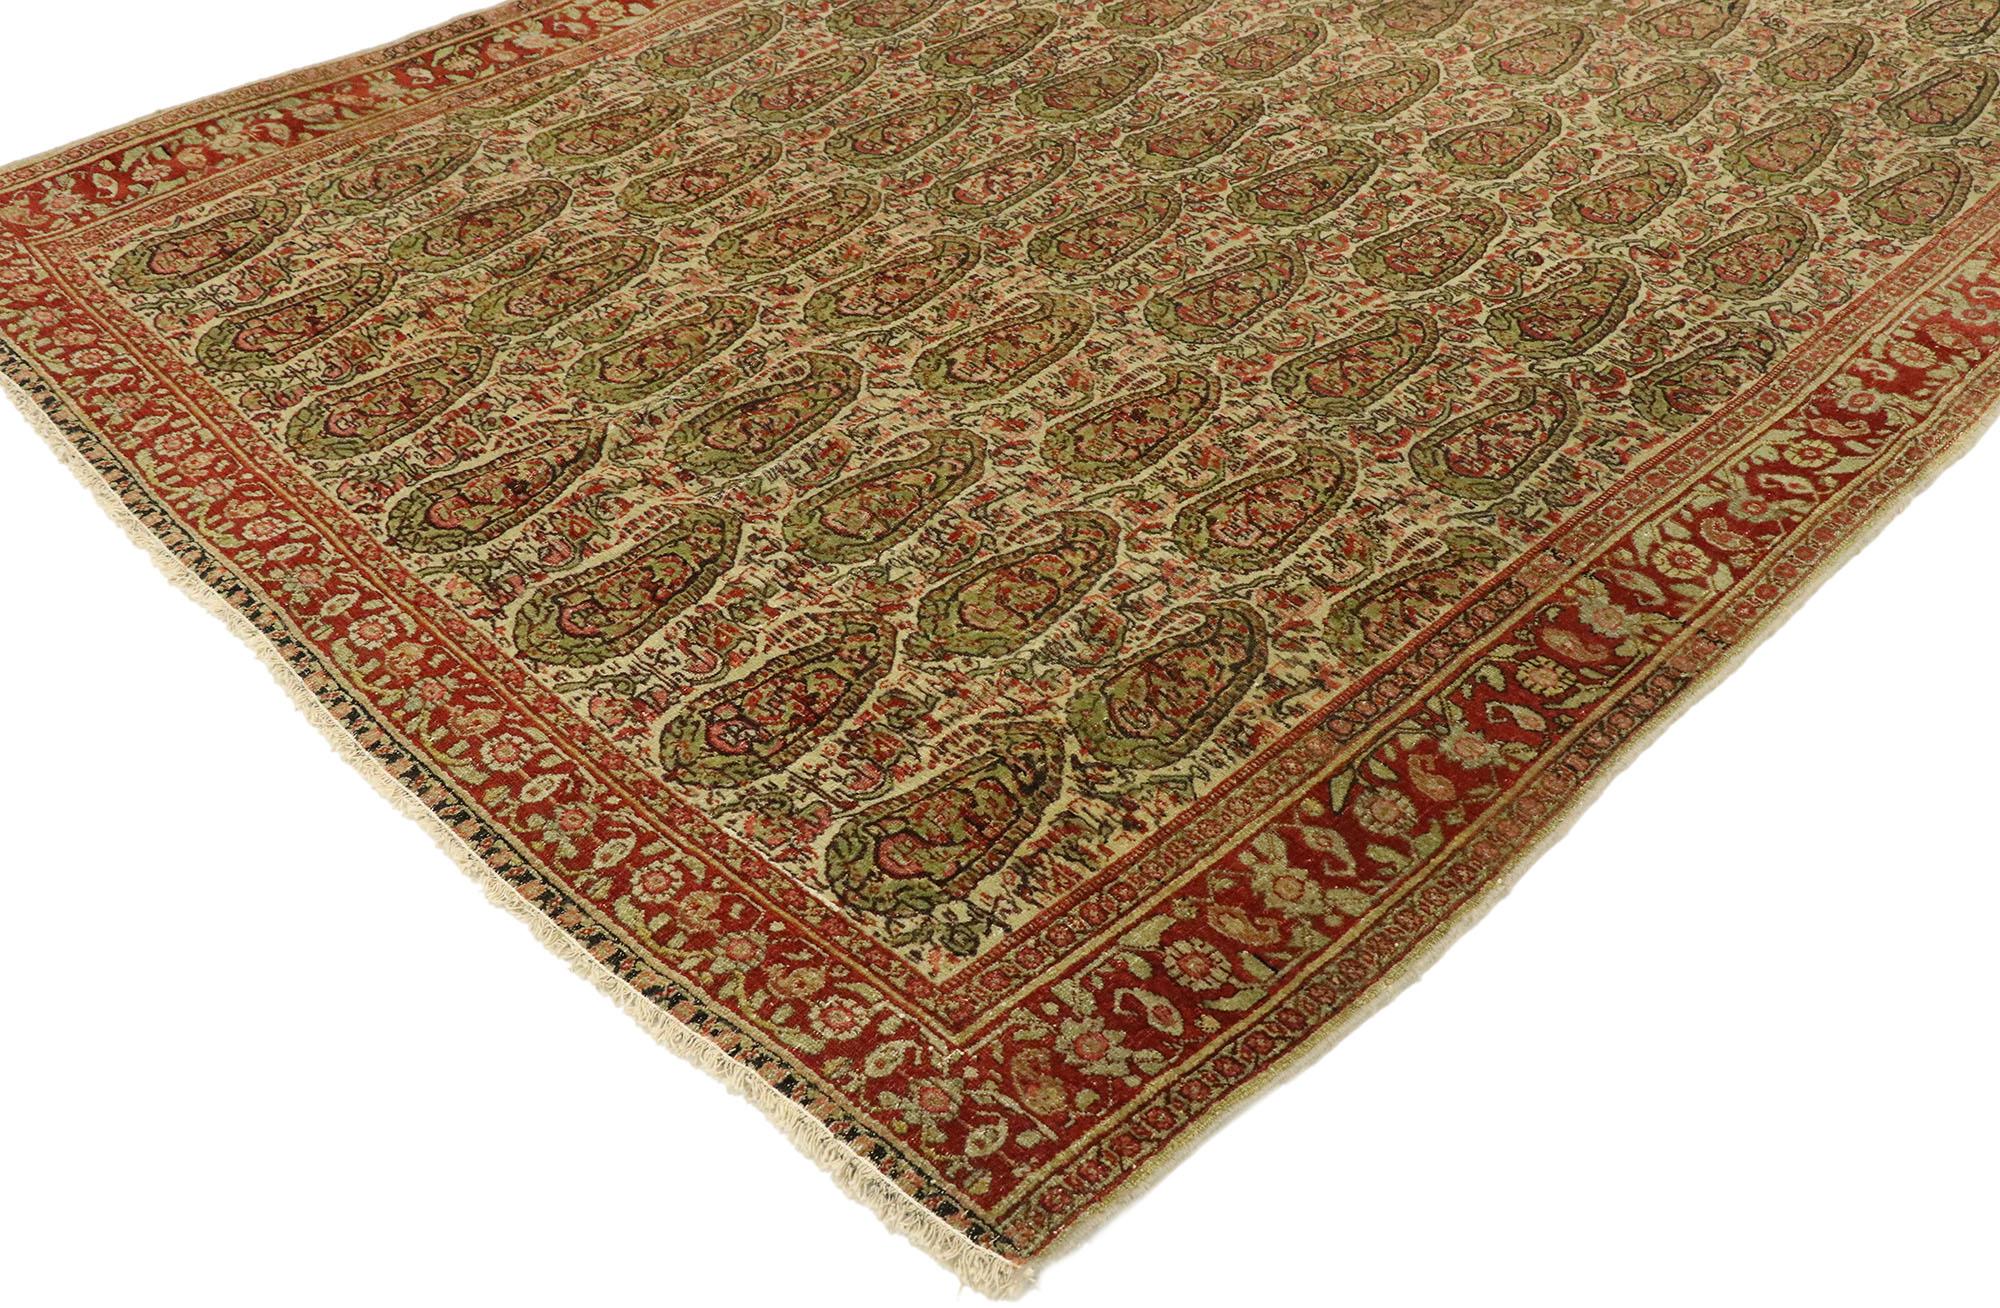 53088 distressed vintage Persian Senneh rug with Rustic Arts & Crafts style. With rustic charm and timeless appeal in an earthy-inspired colorway, this hand knotted wool vintage Persian Senneh can beautifully blend modern, contemporary, and